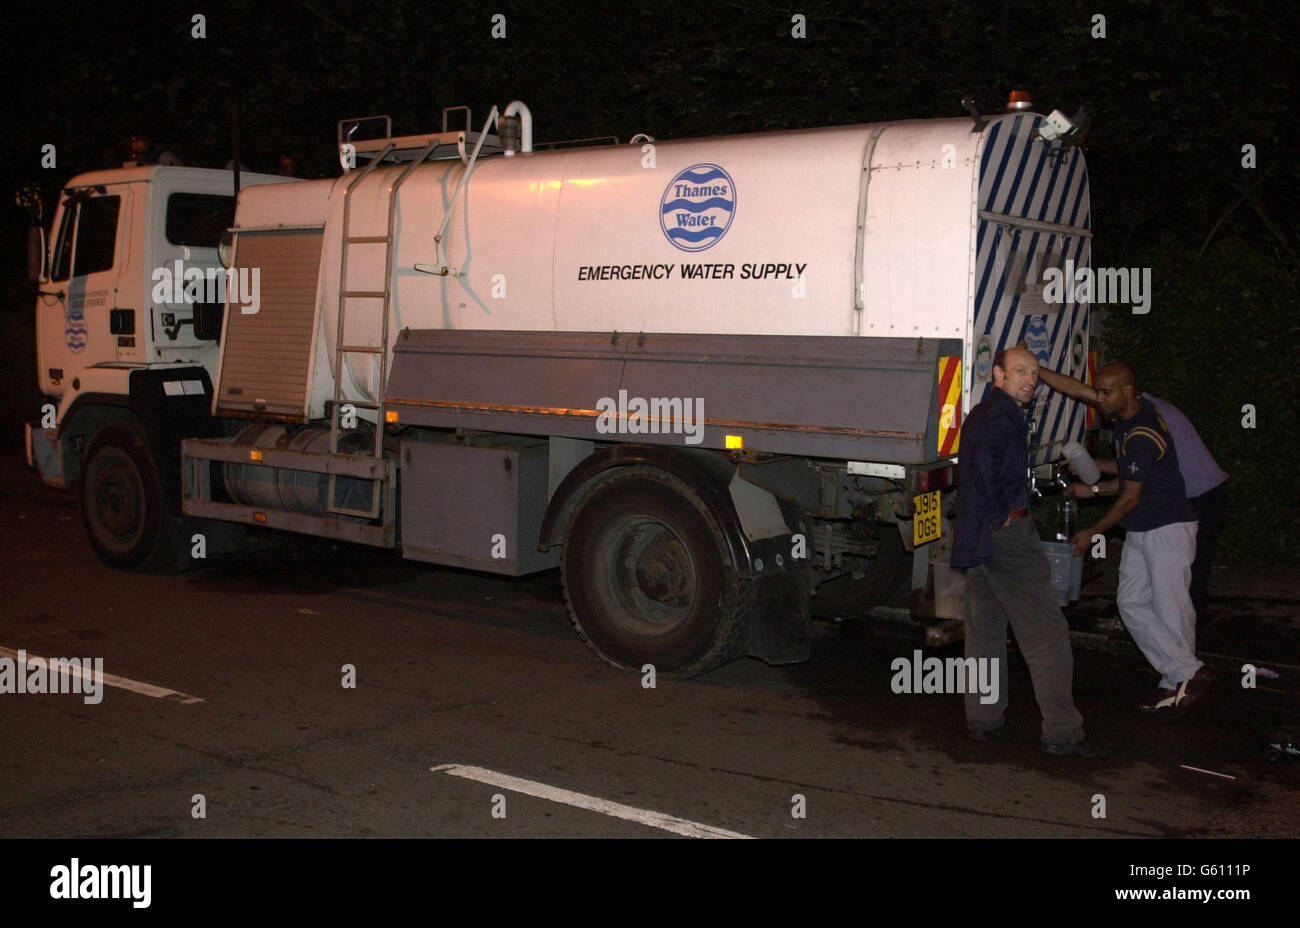 Residents in Streatham, south London, fill containers from an emergency water supply bowser, About 9,000 homes were without water supplies tonight after a mains pipe burst. * Engineers have been battling to restore the water supply after the mains pipe ruptured at about 7am at the junction of Leigham Vale and Palace Road in Streatham. Stock Photo